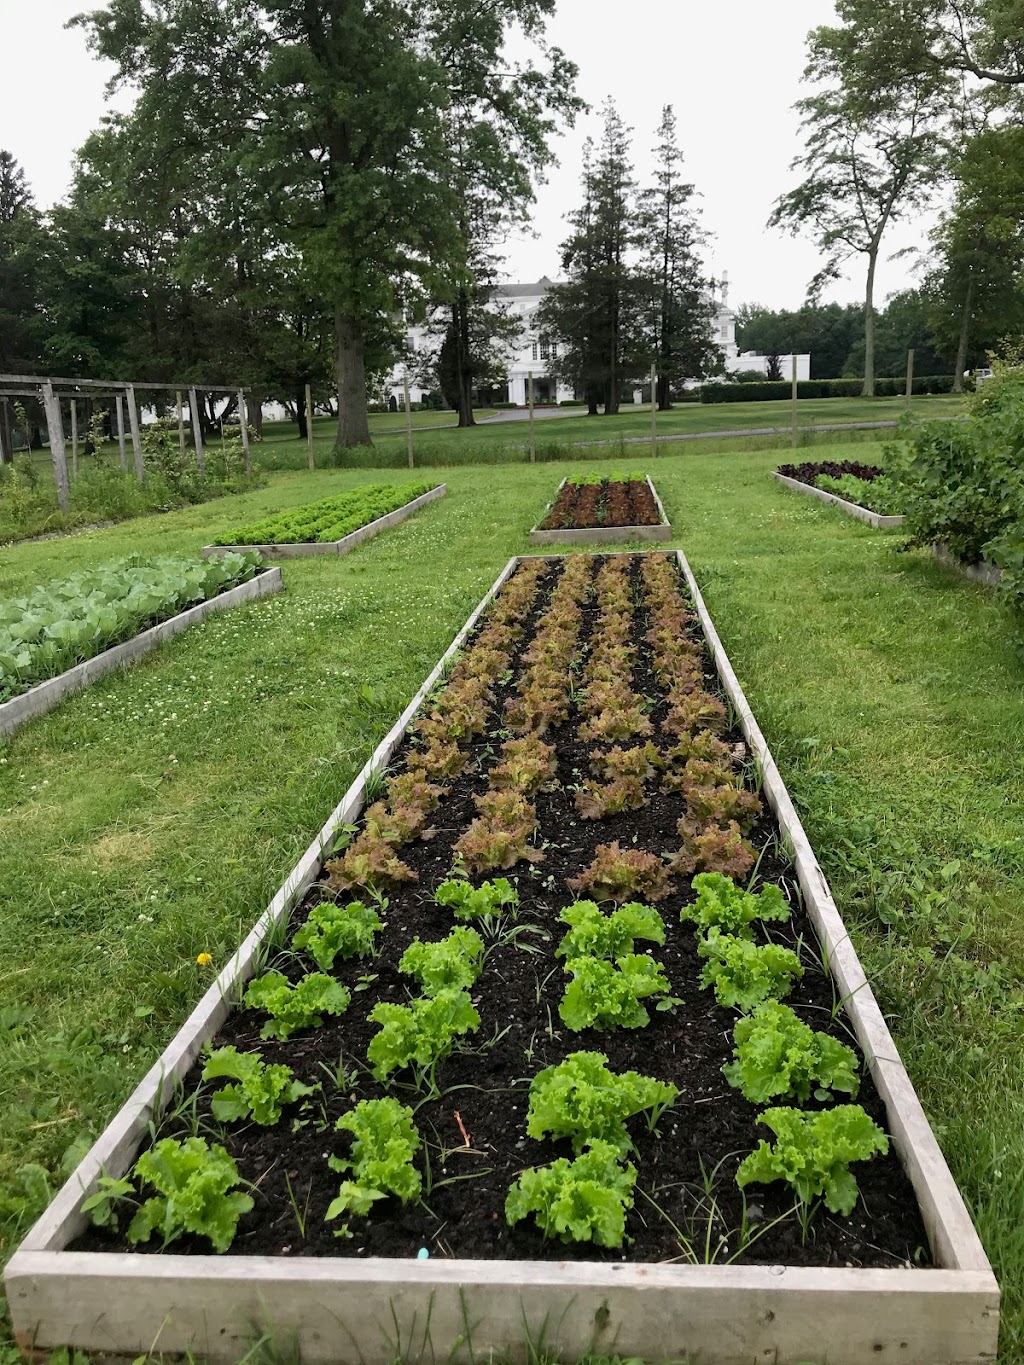 Our New Way Garden | 10 New King St, West Harrison, NY 10604 | Phone: (914) 681-5100